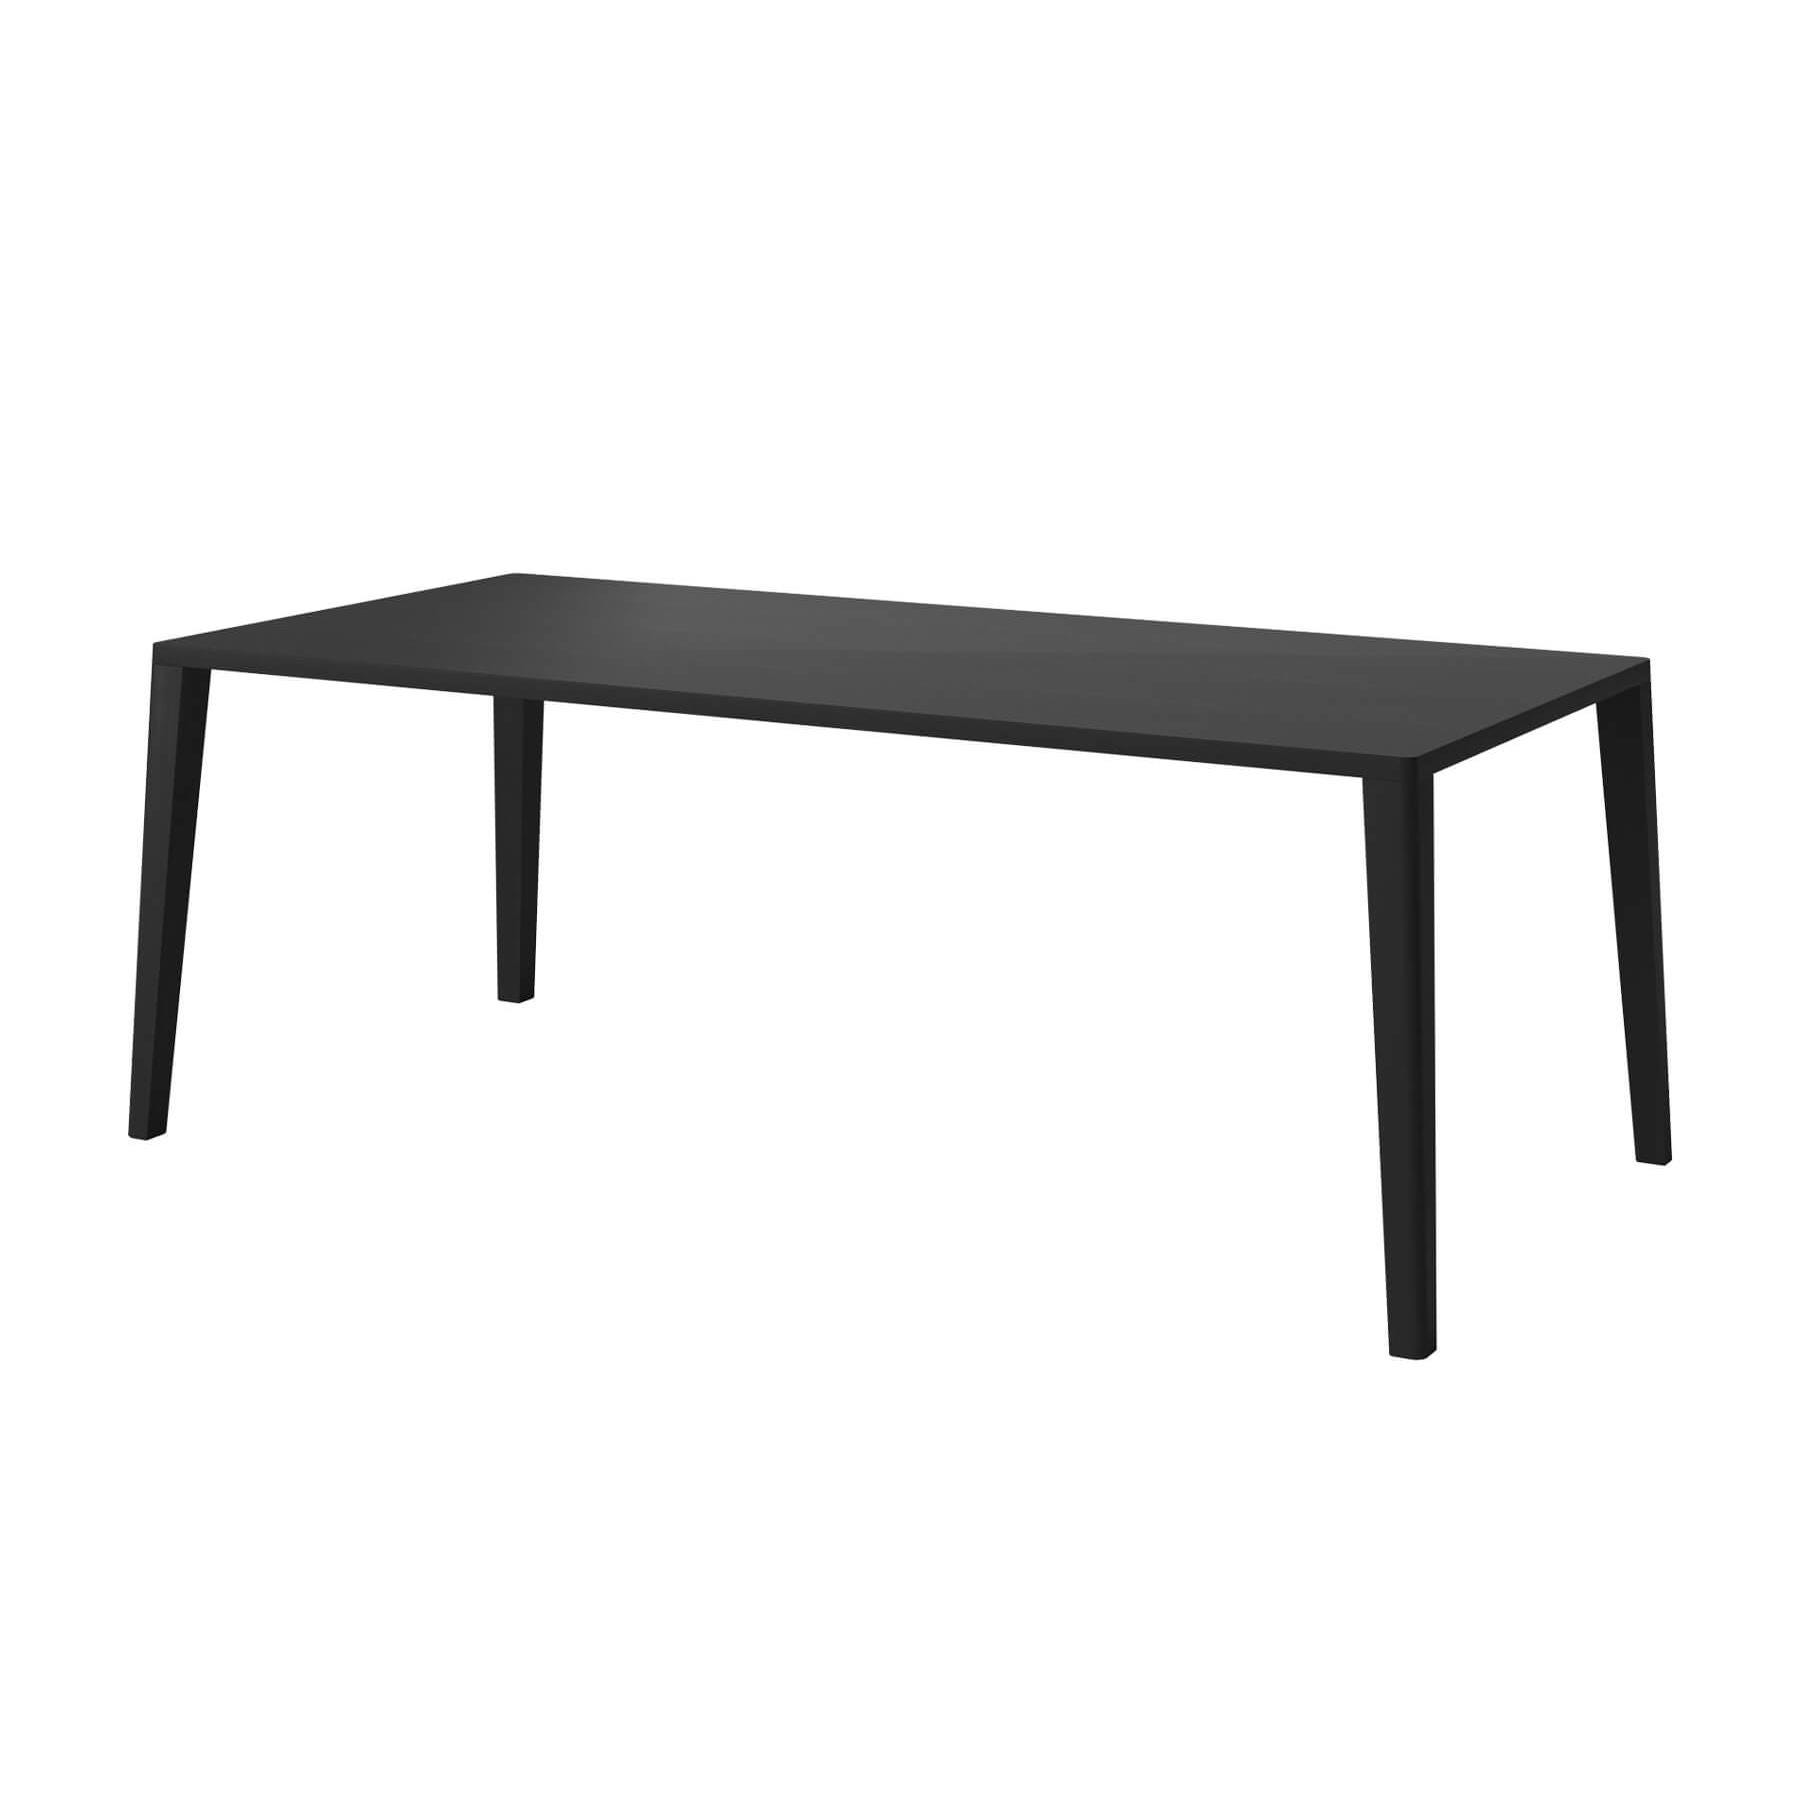 Bolia Graceful Dining Table 200 X 95cm Black Stained With Extension Leaves Designer Furniture From Holloways Of Ludlow